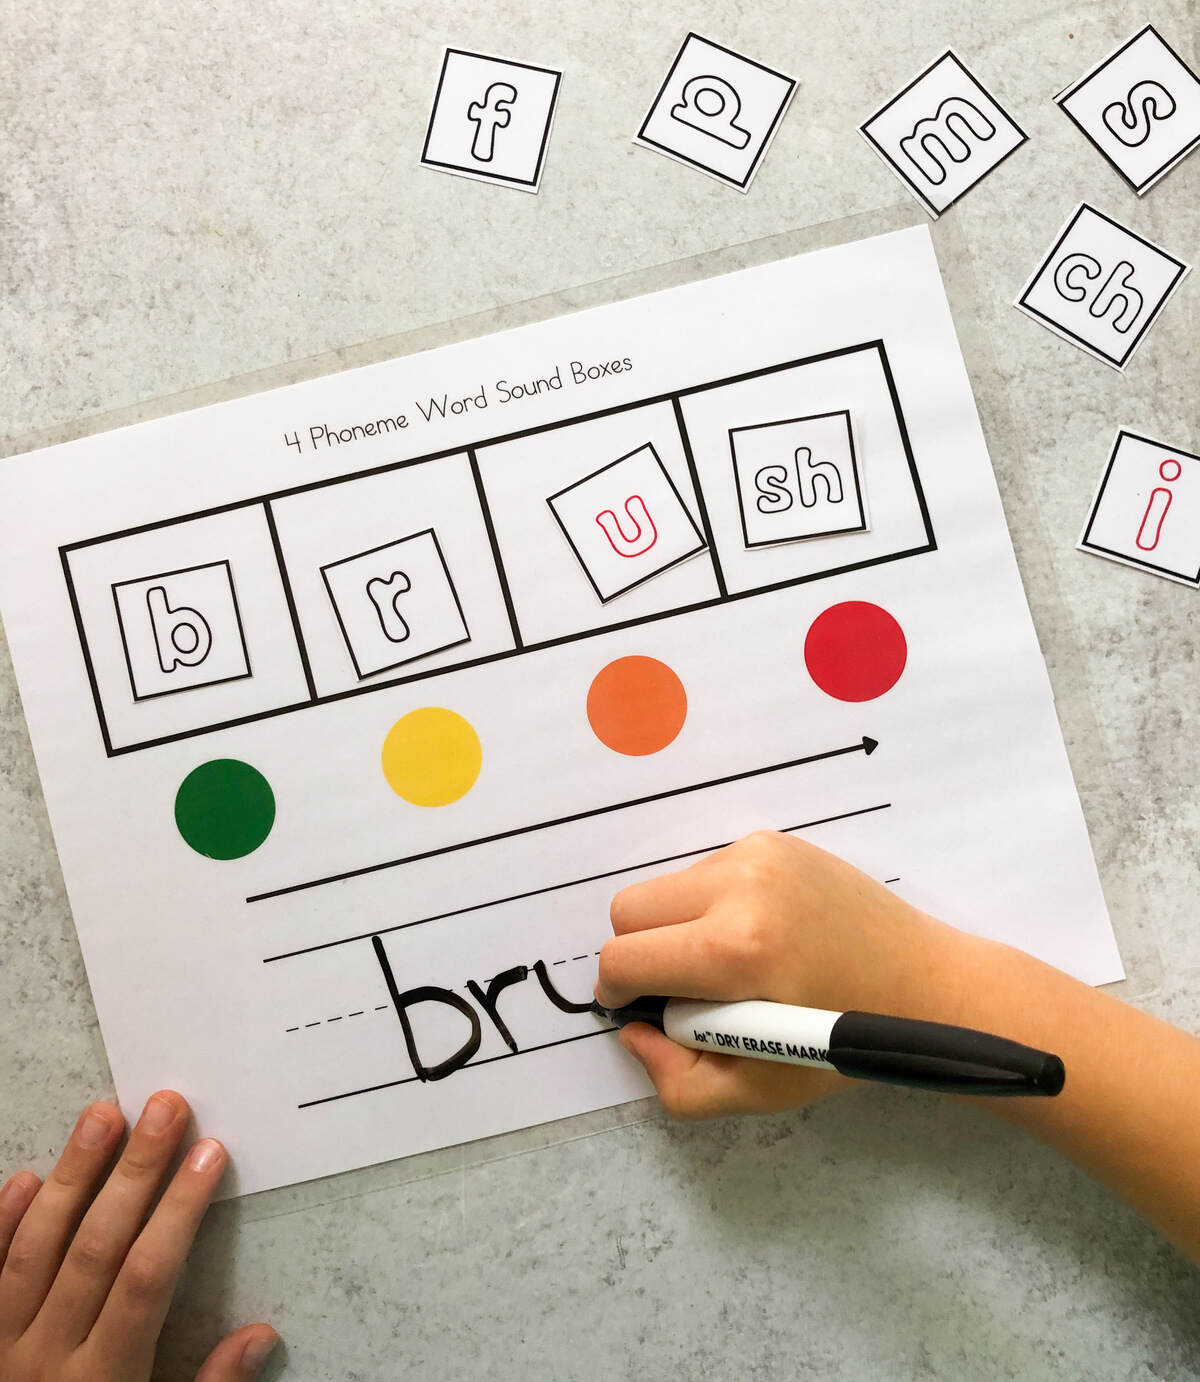 A child using a sound box worksheet to map the word "brush."